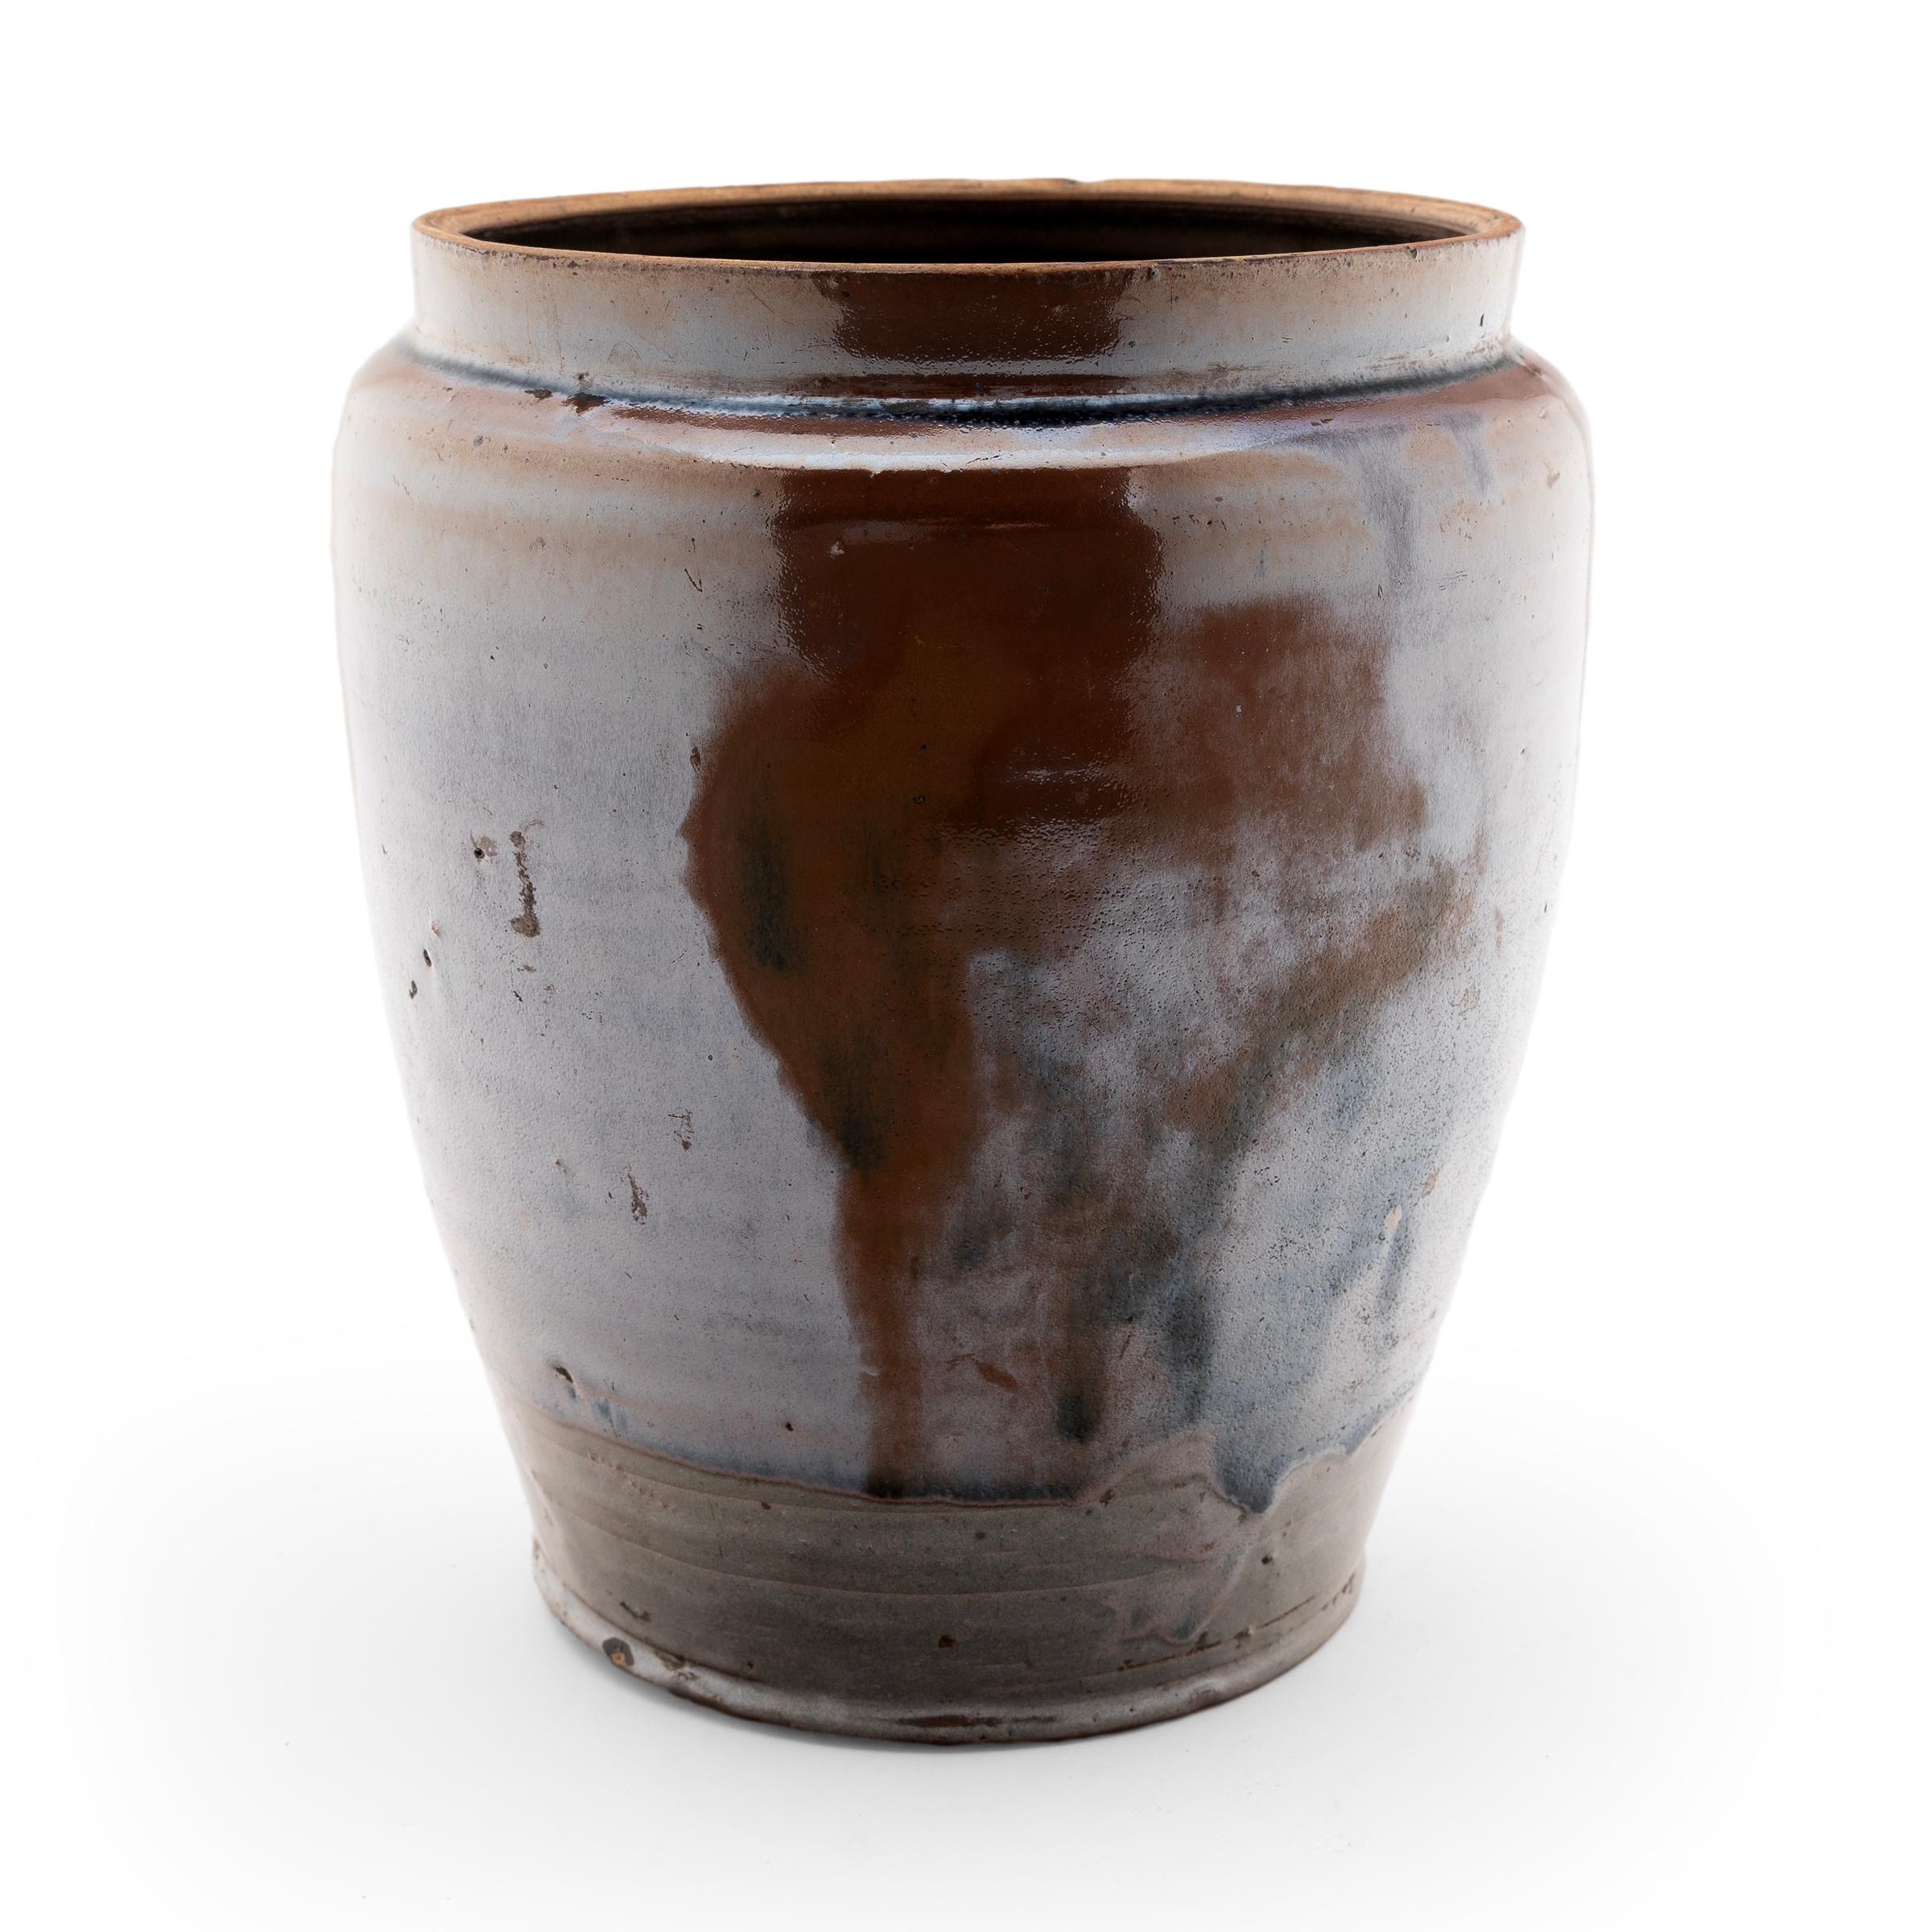 A thick, glossy brown glaze coats the tapered form of this early 20th-century terra cotta kitchen jar, lingering on imperfections and glistening with an iridescent sheen. As evidenced by the glazed interior, this wide-mouth jar was once used daily